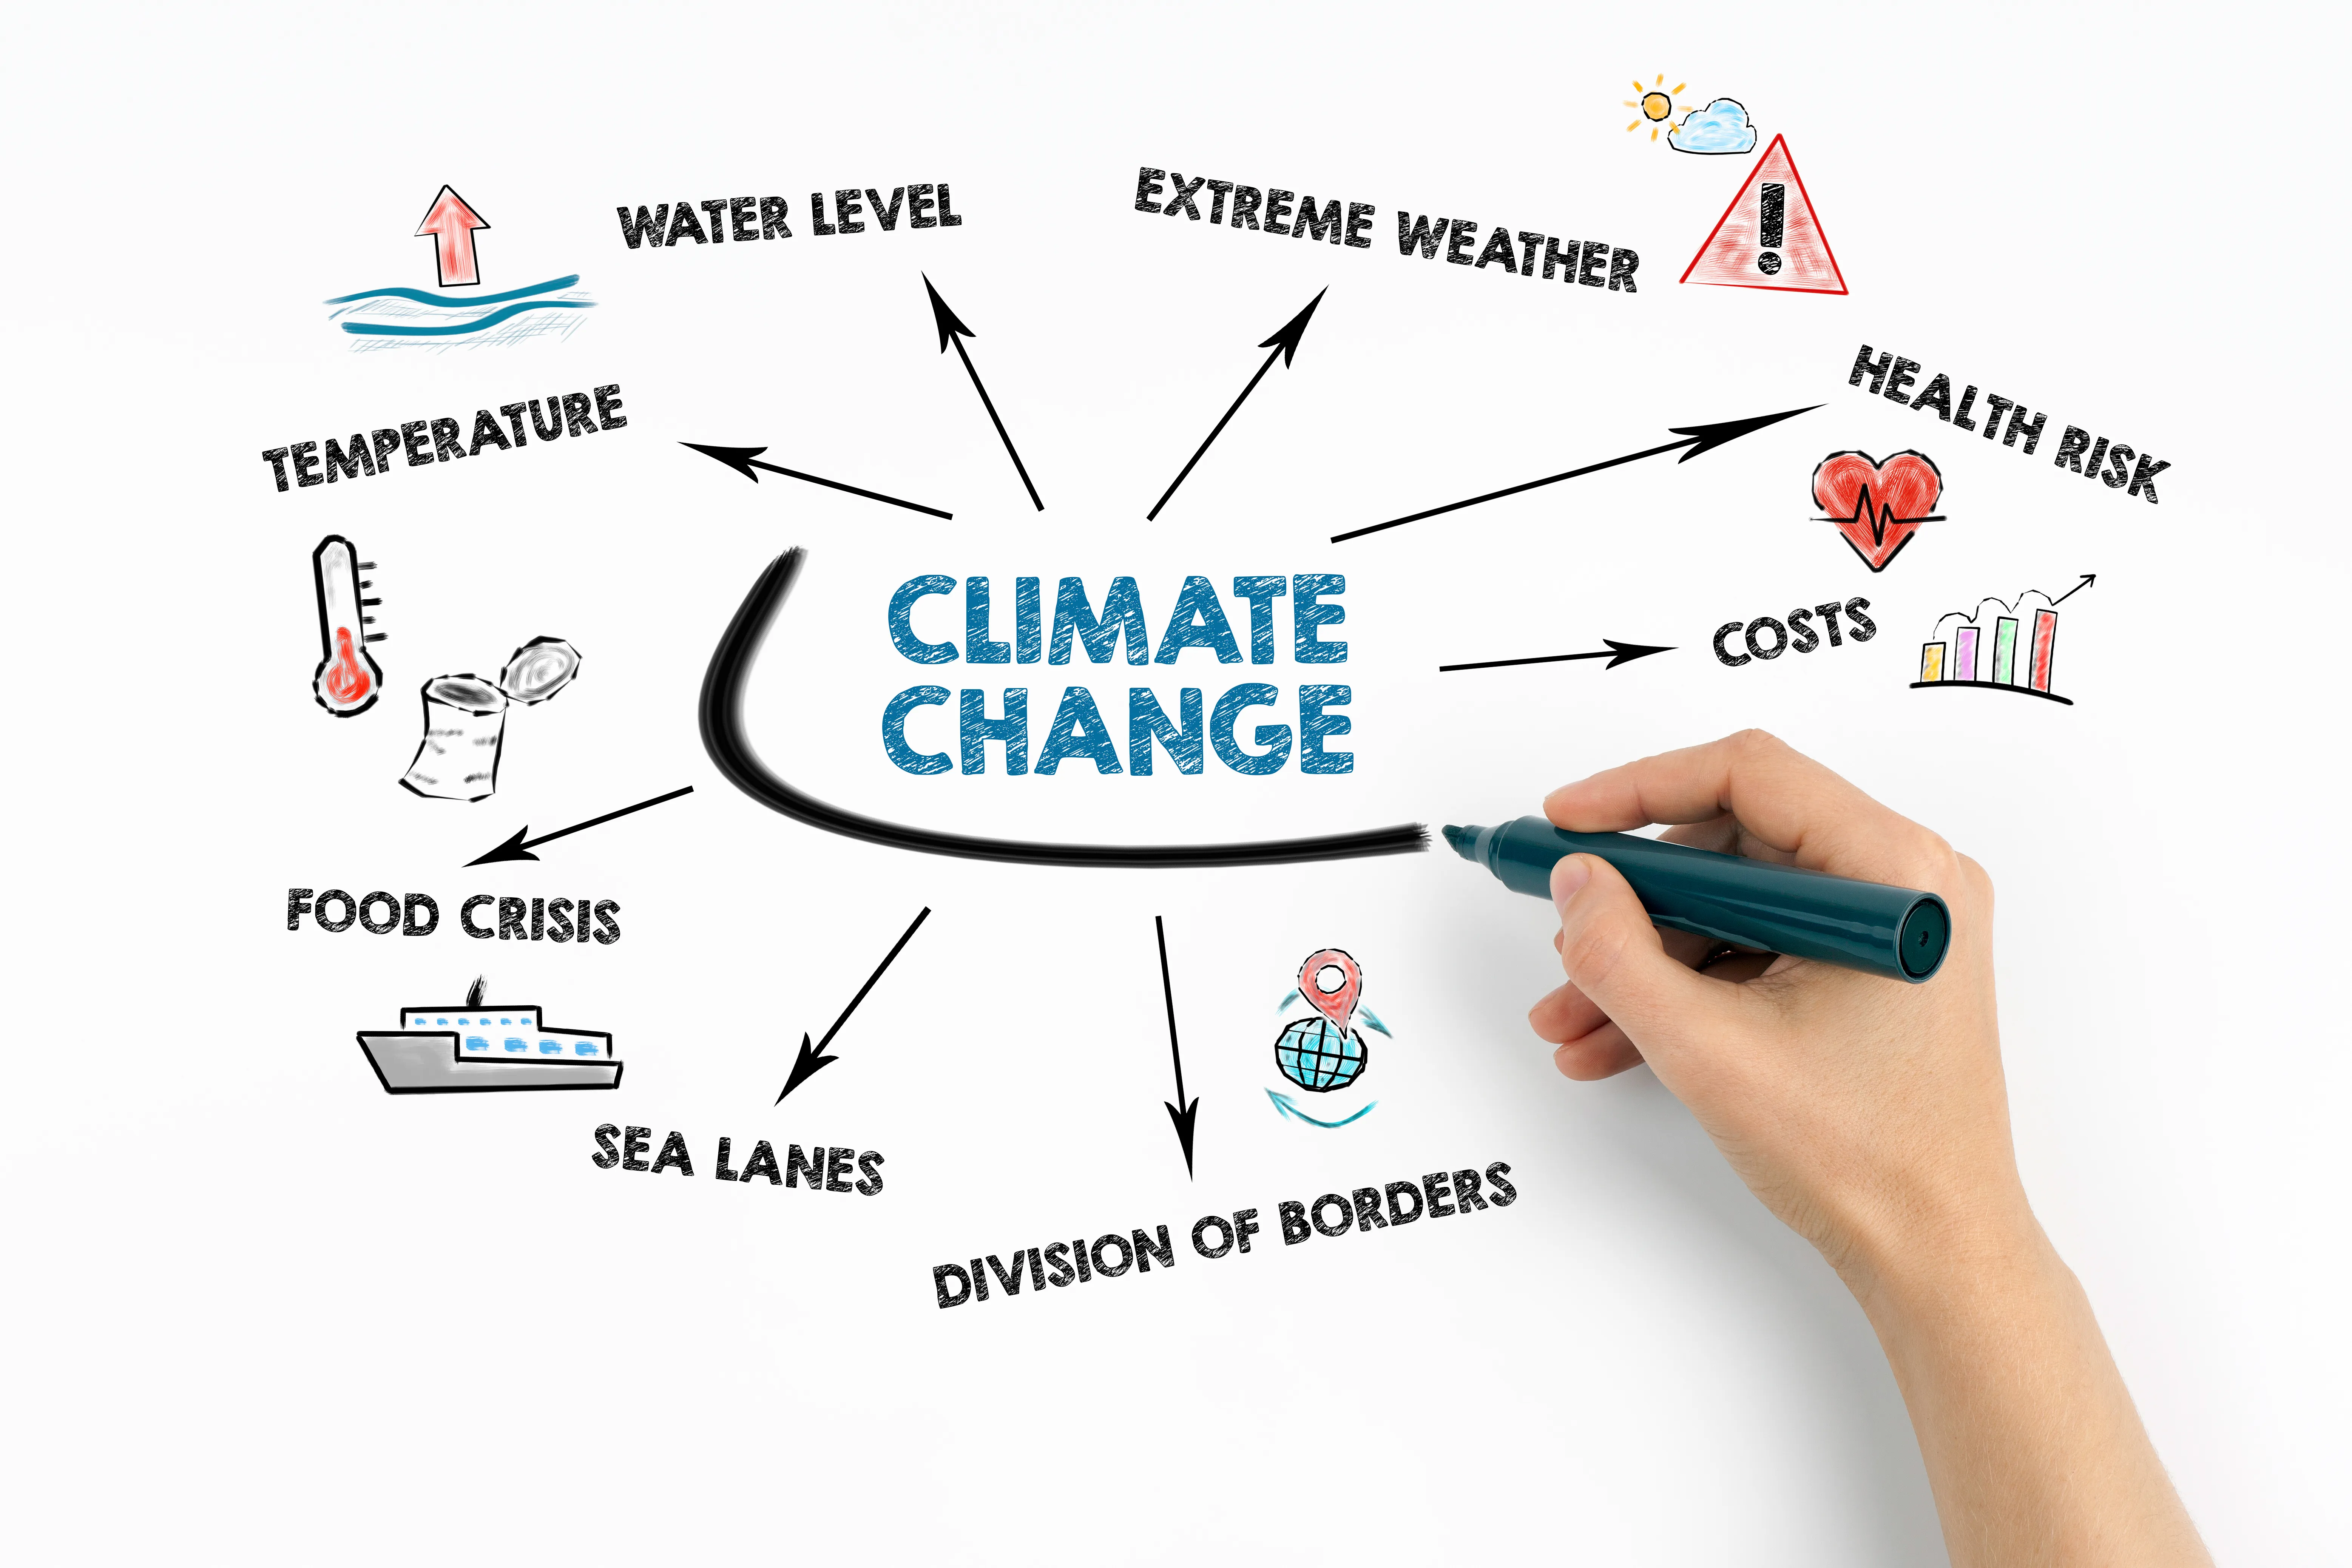 Hand drawing a line around the words "Climate Change" with surrounding words and images showing impacts